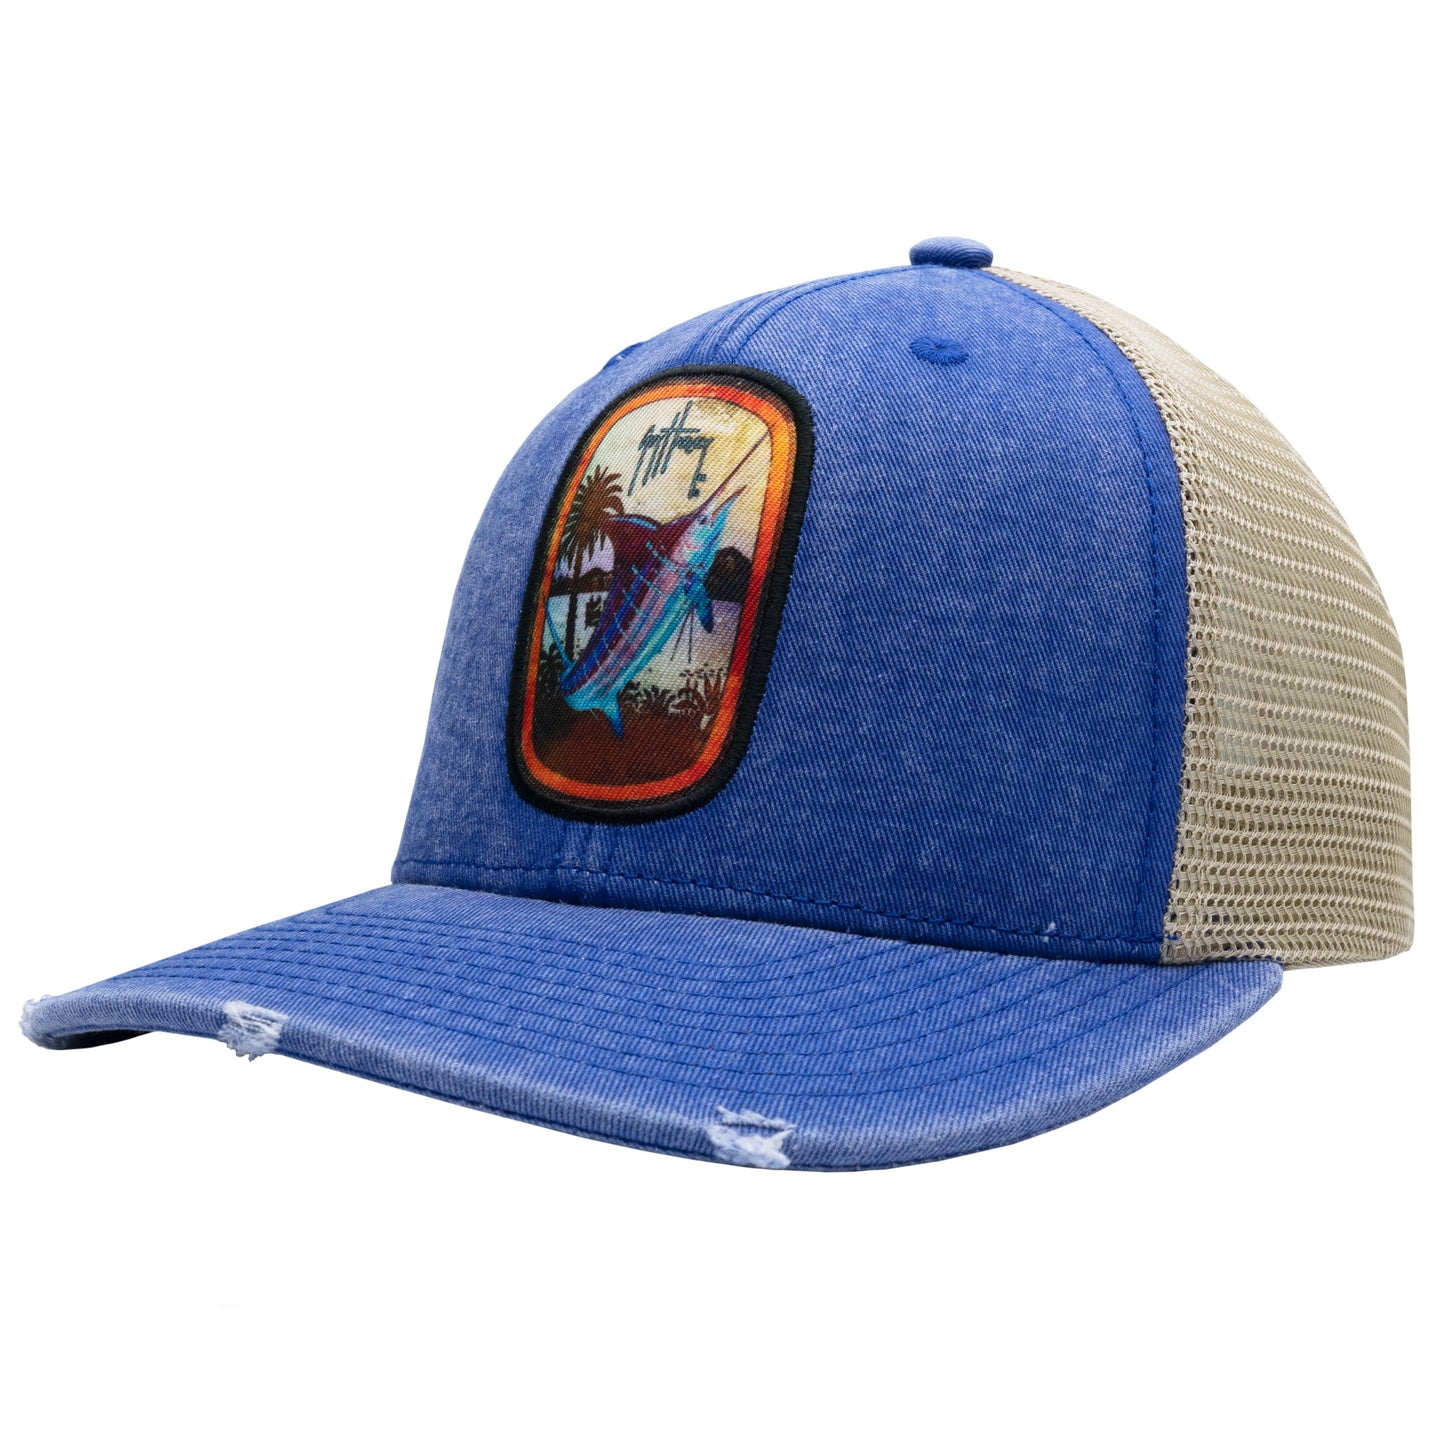 Dominica Patch Distressed Trucker Hat View 1